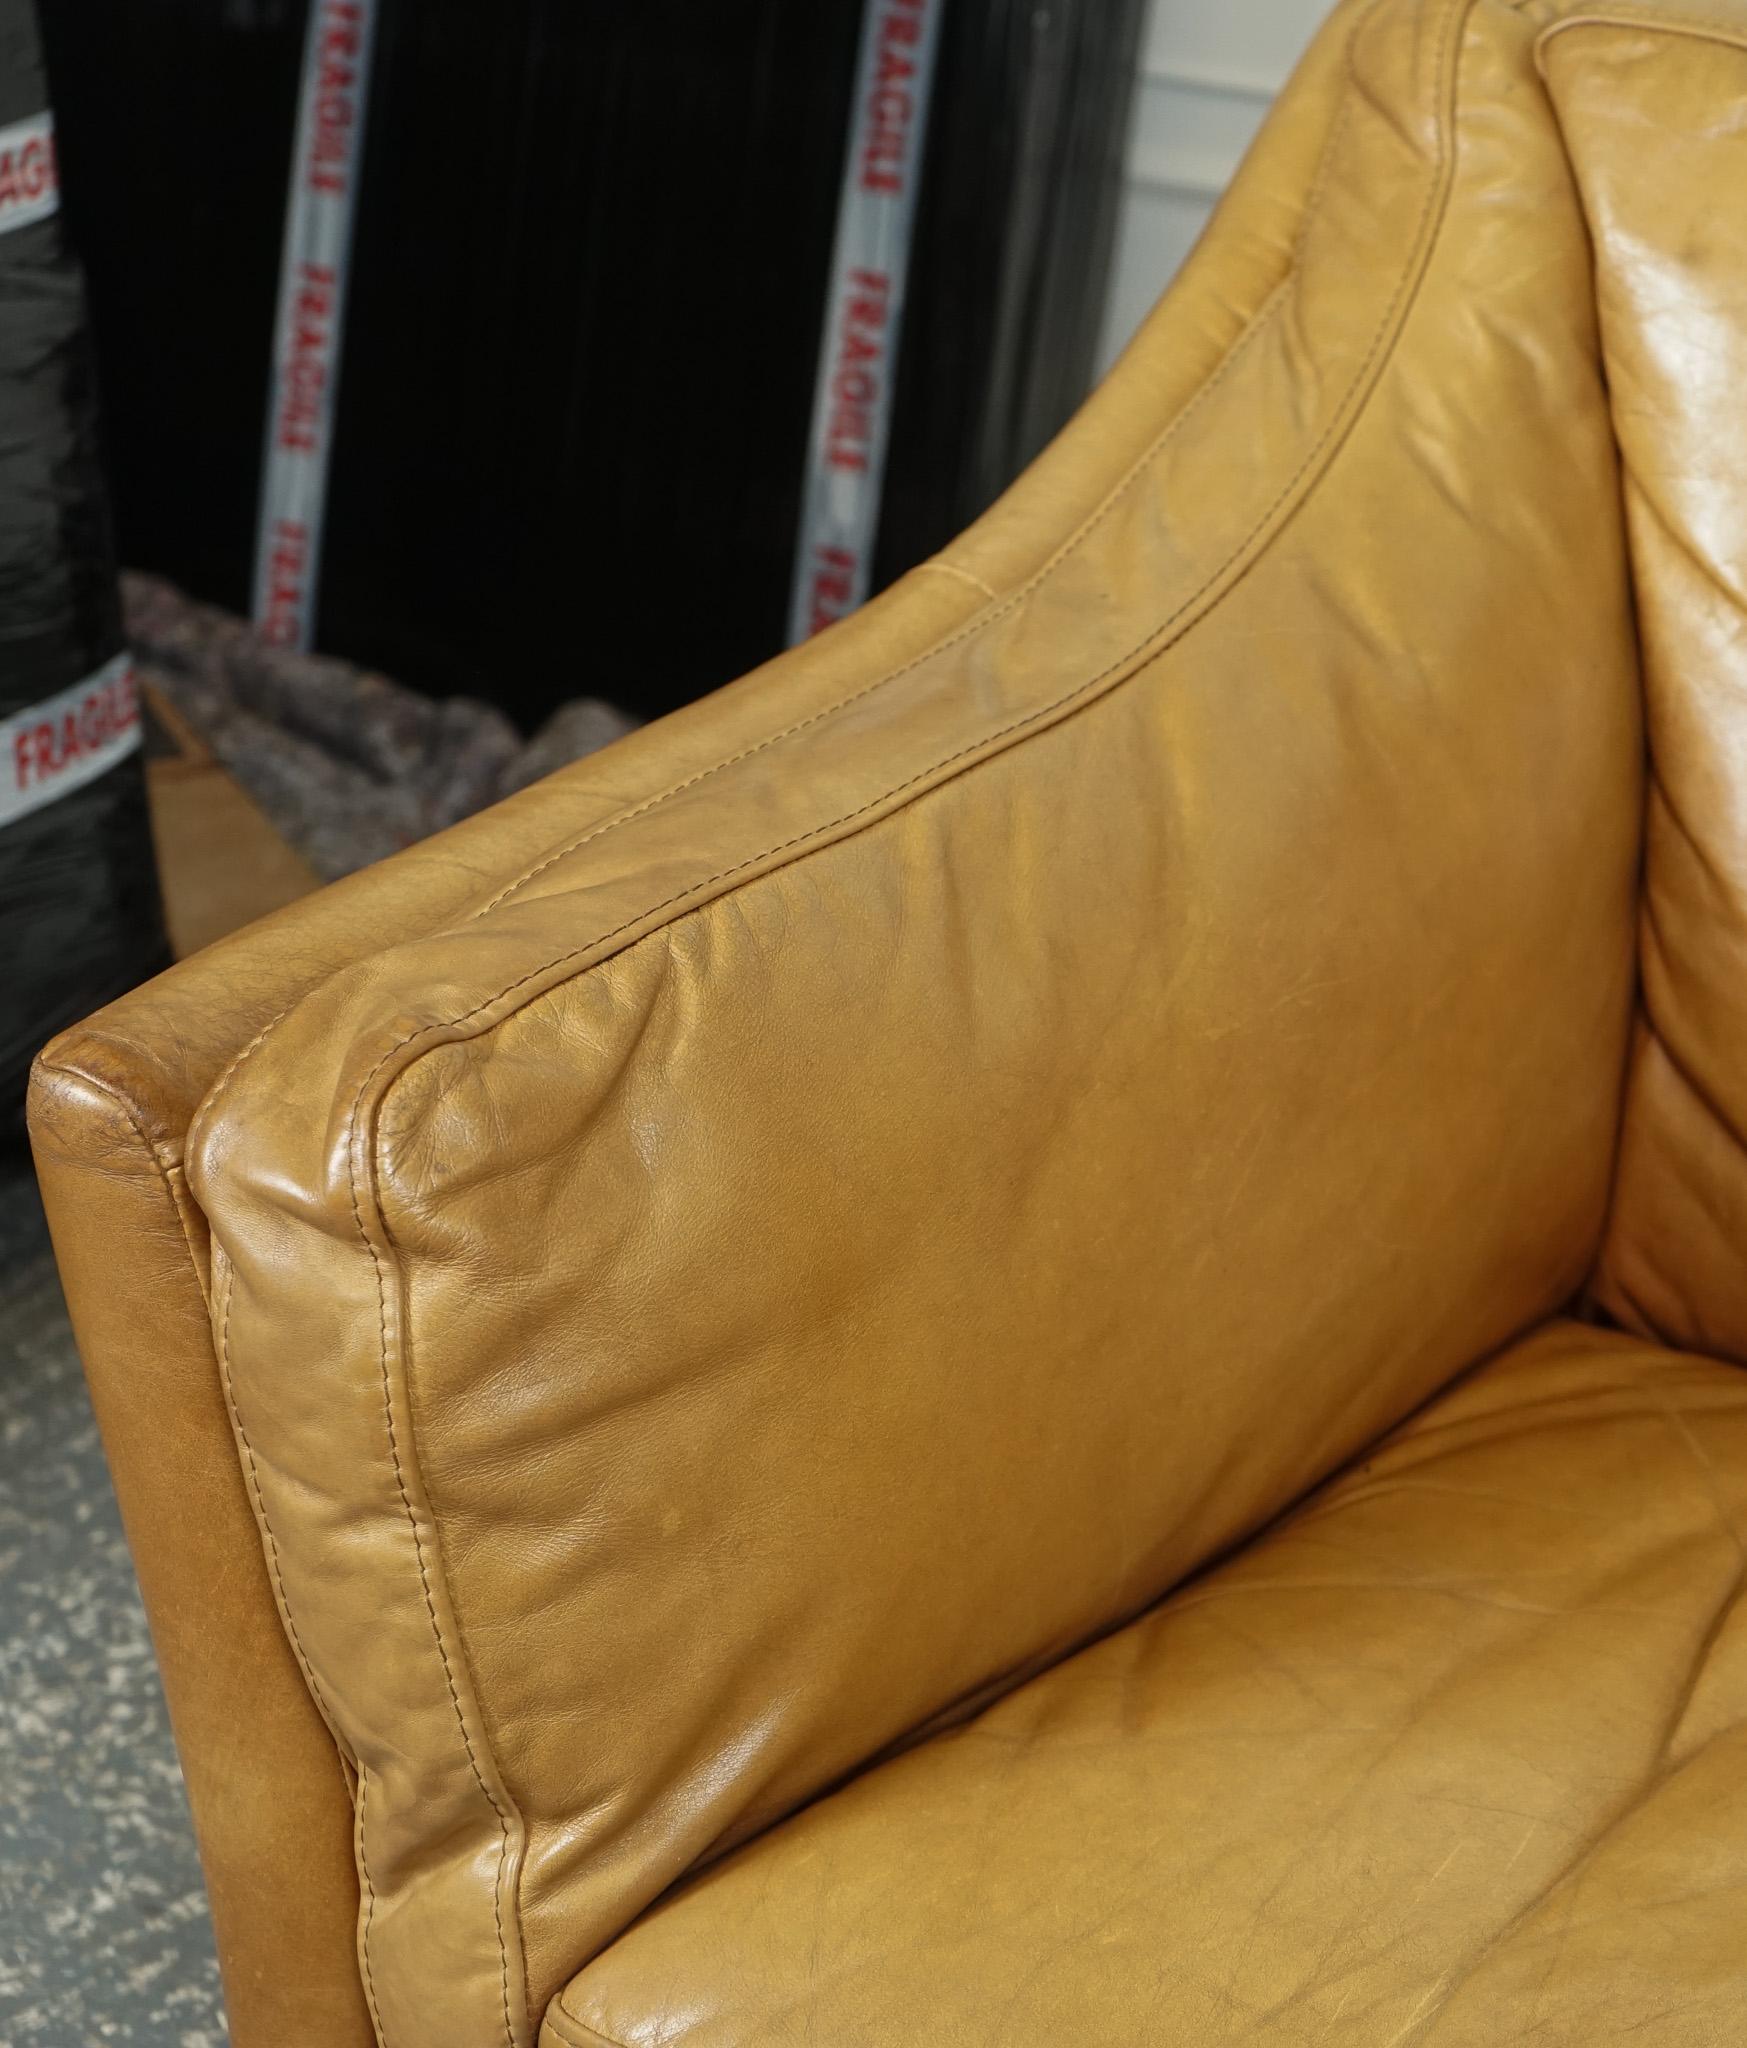 COMPACT AND VERY COMFORTABLE HALO REGGIO TAN LEATHER ARMCHAiR In Good Condition For Sale In Pulborough, GB